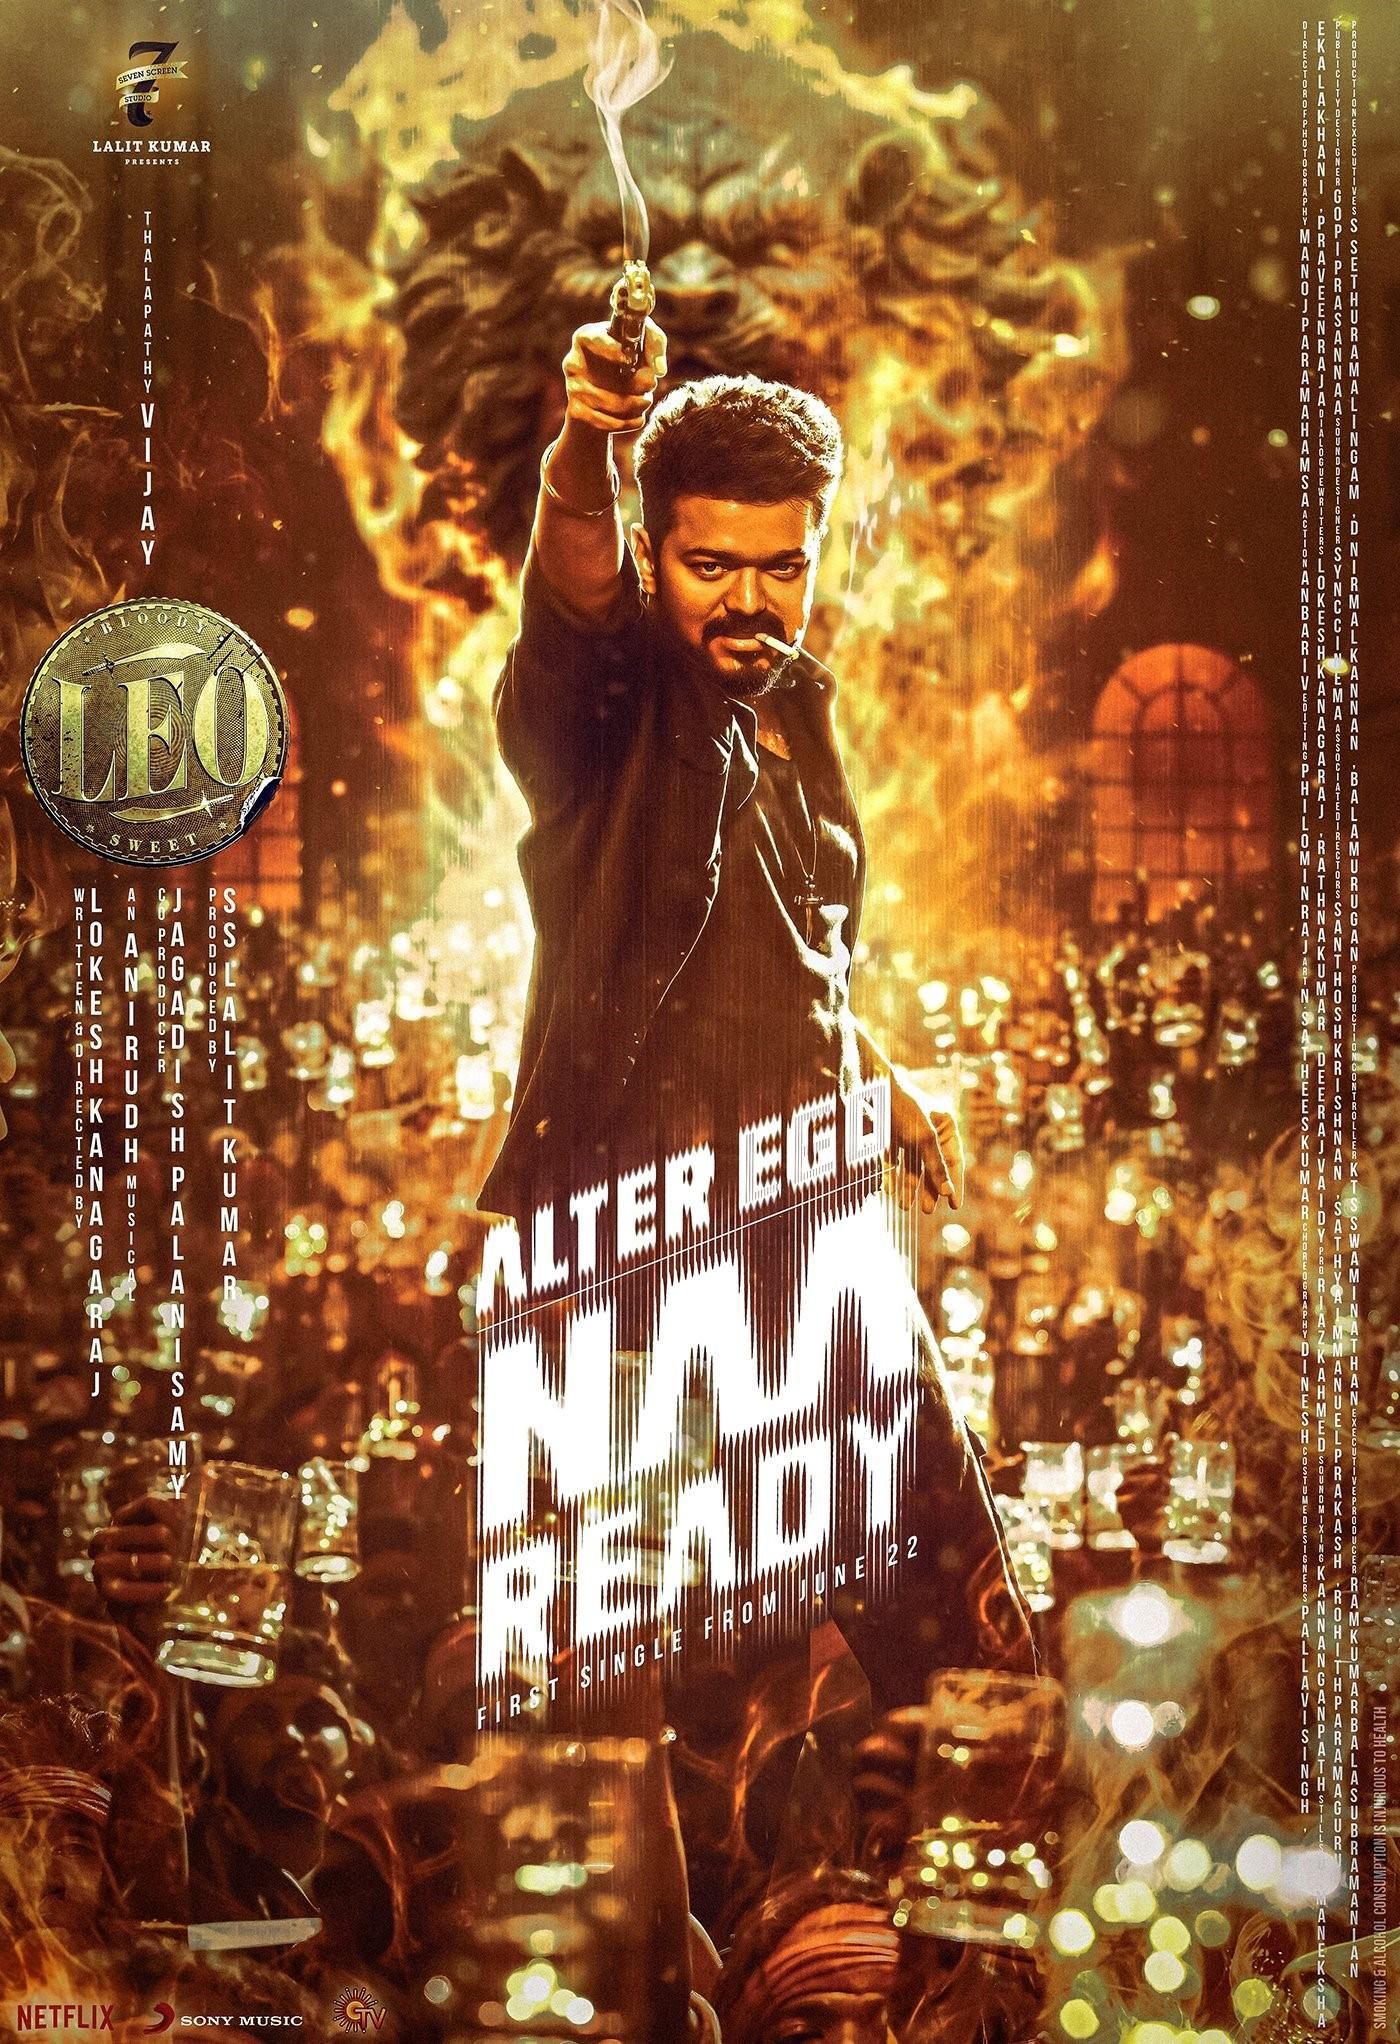 Leo first single titled Naa Ready! New poster feat. Vijay